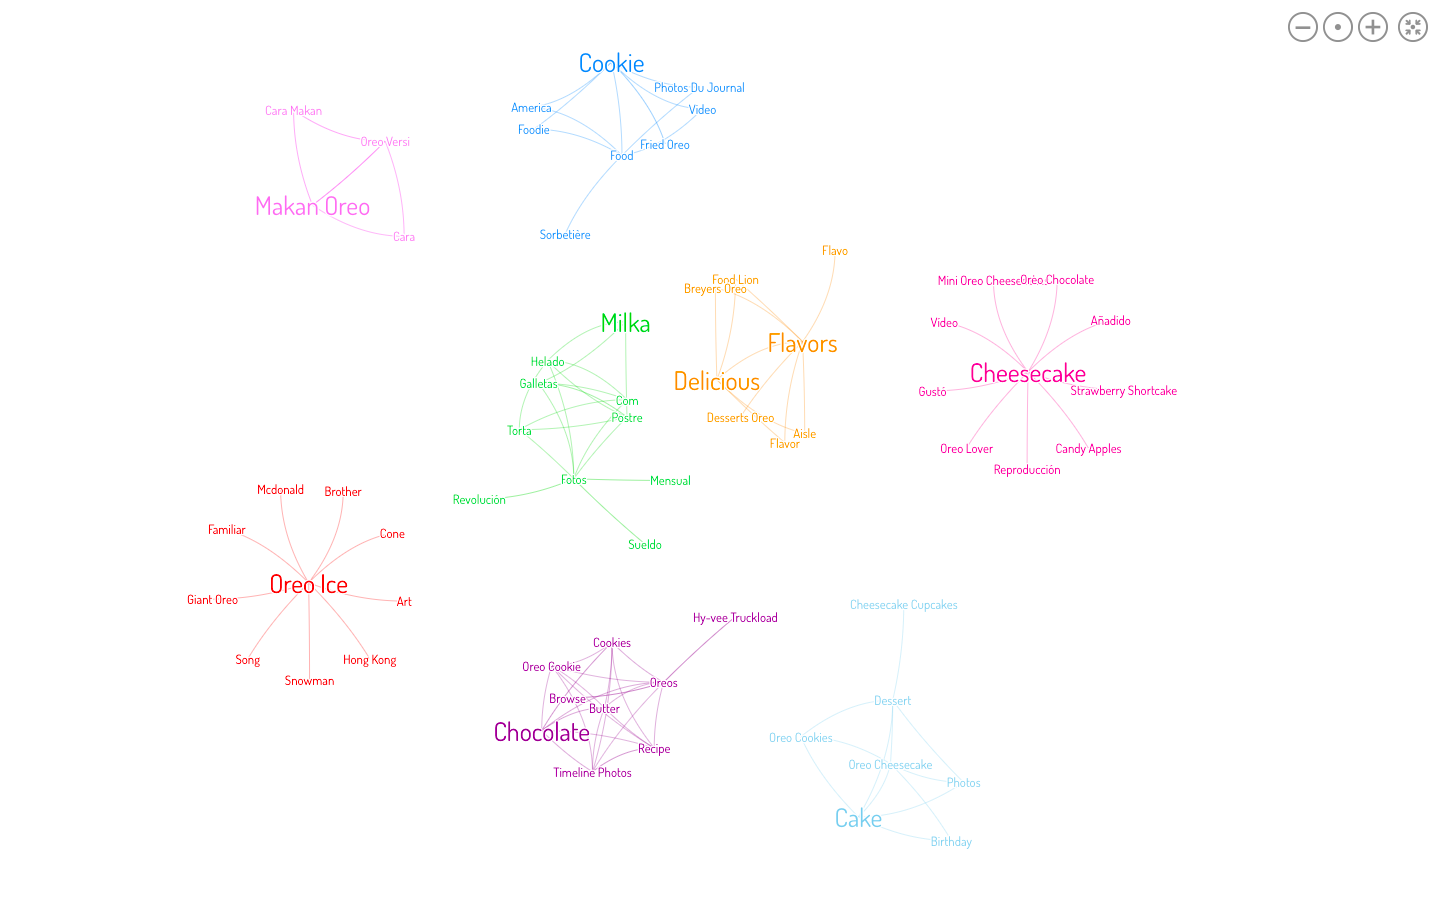 A data visualization displaying key trends in online conversations around Oreo